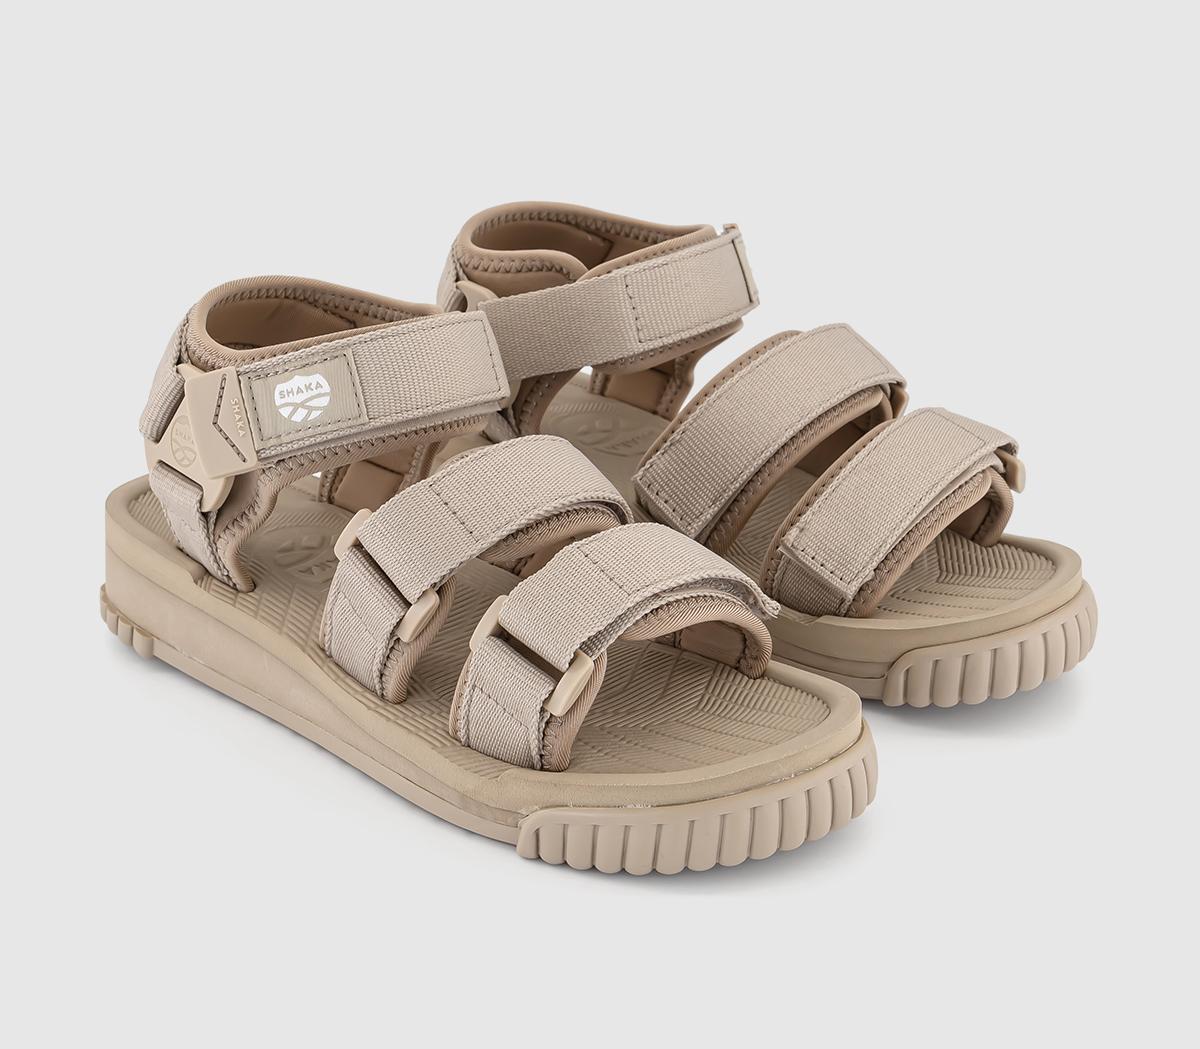 Shaka Neo Bungy Sandals Taupe Natural, 3